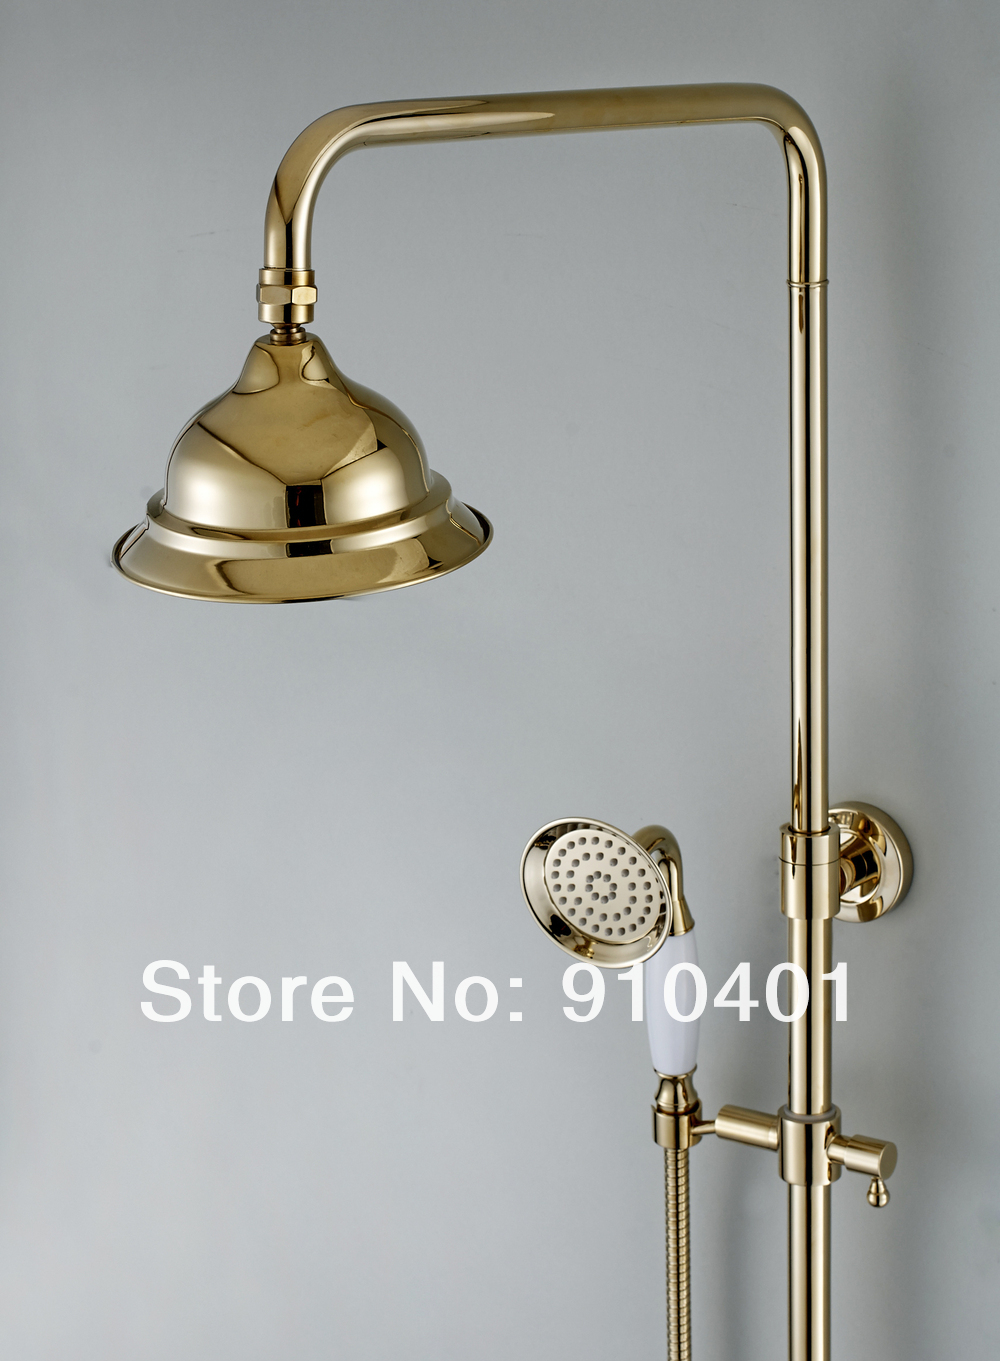 NEW Wholesale /Retail Promotion Luxury Wall Mounted Bathroom Shower Faucet Set Ceramic Handles Shower Mixer Tap